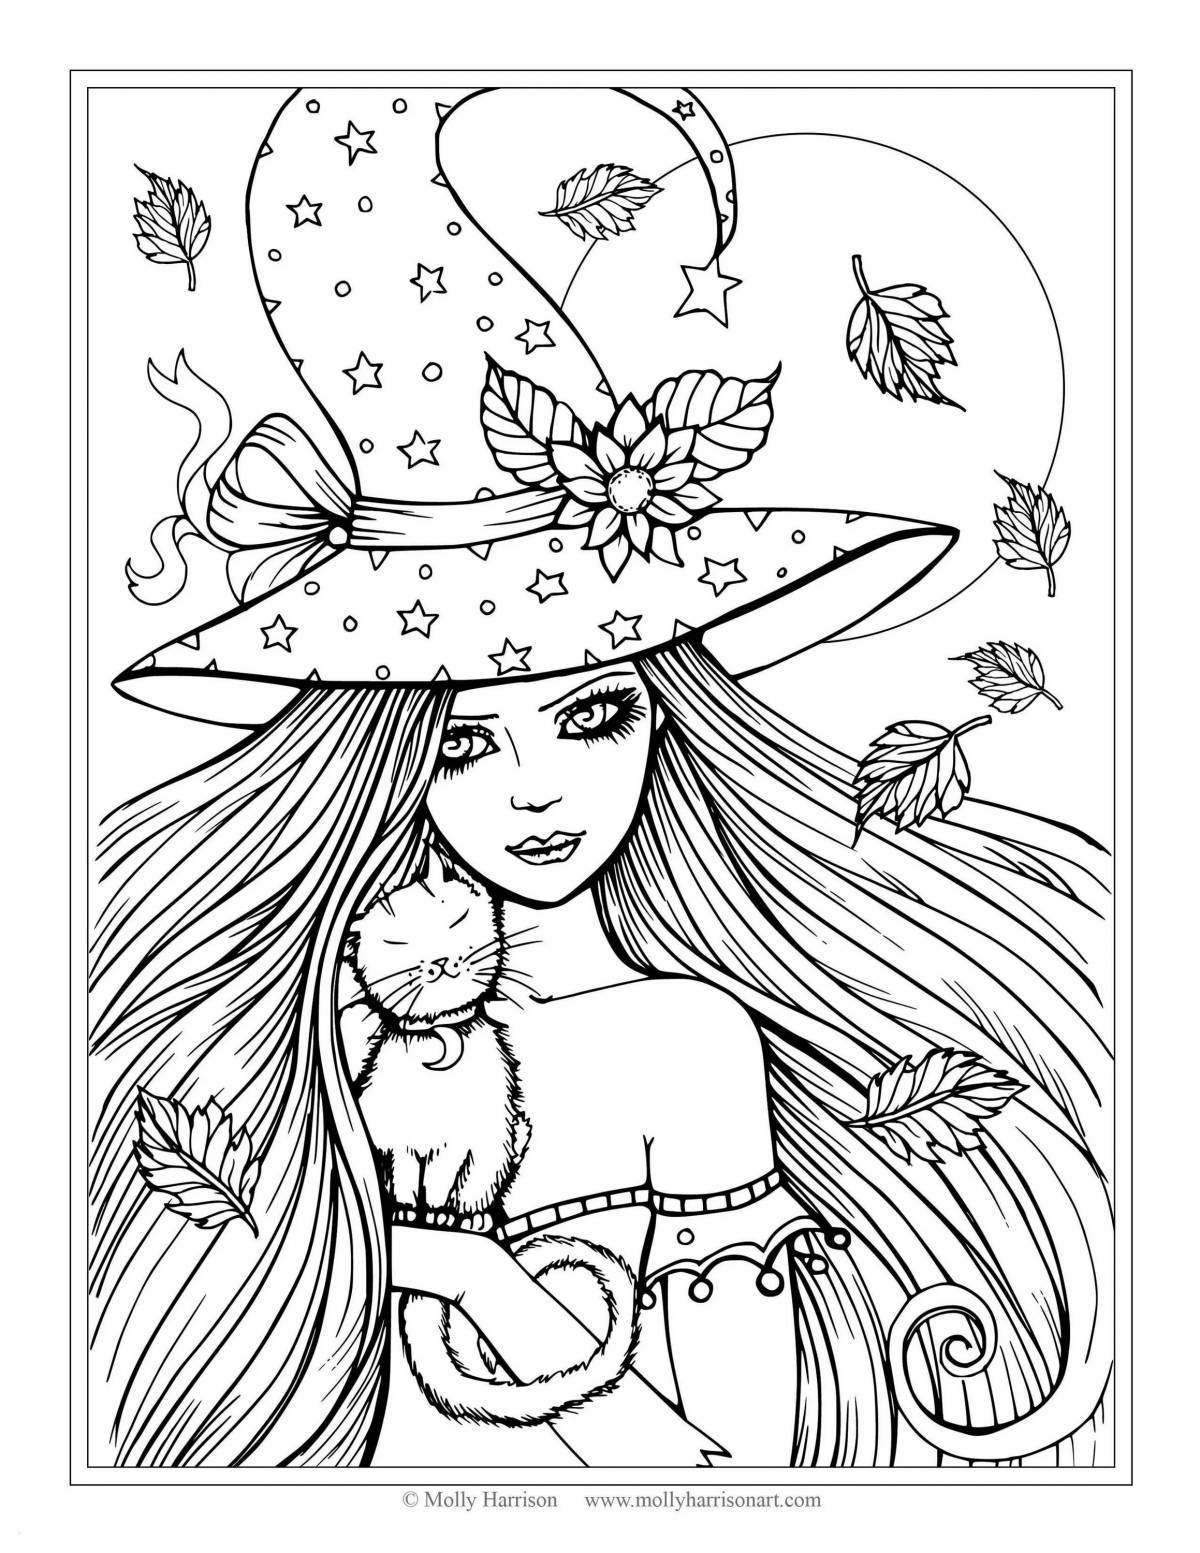 Spectacular coloring book for girls 13 years old